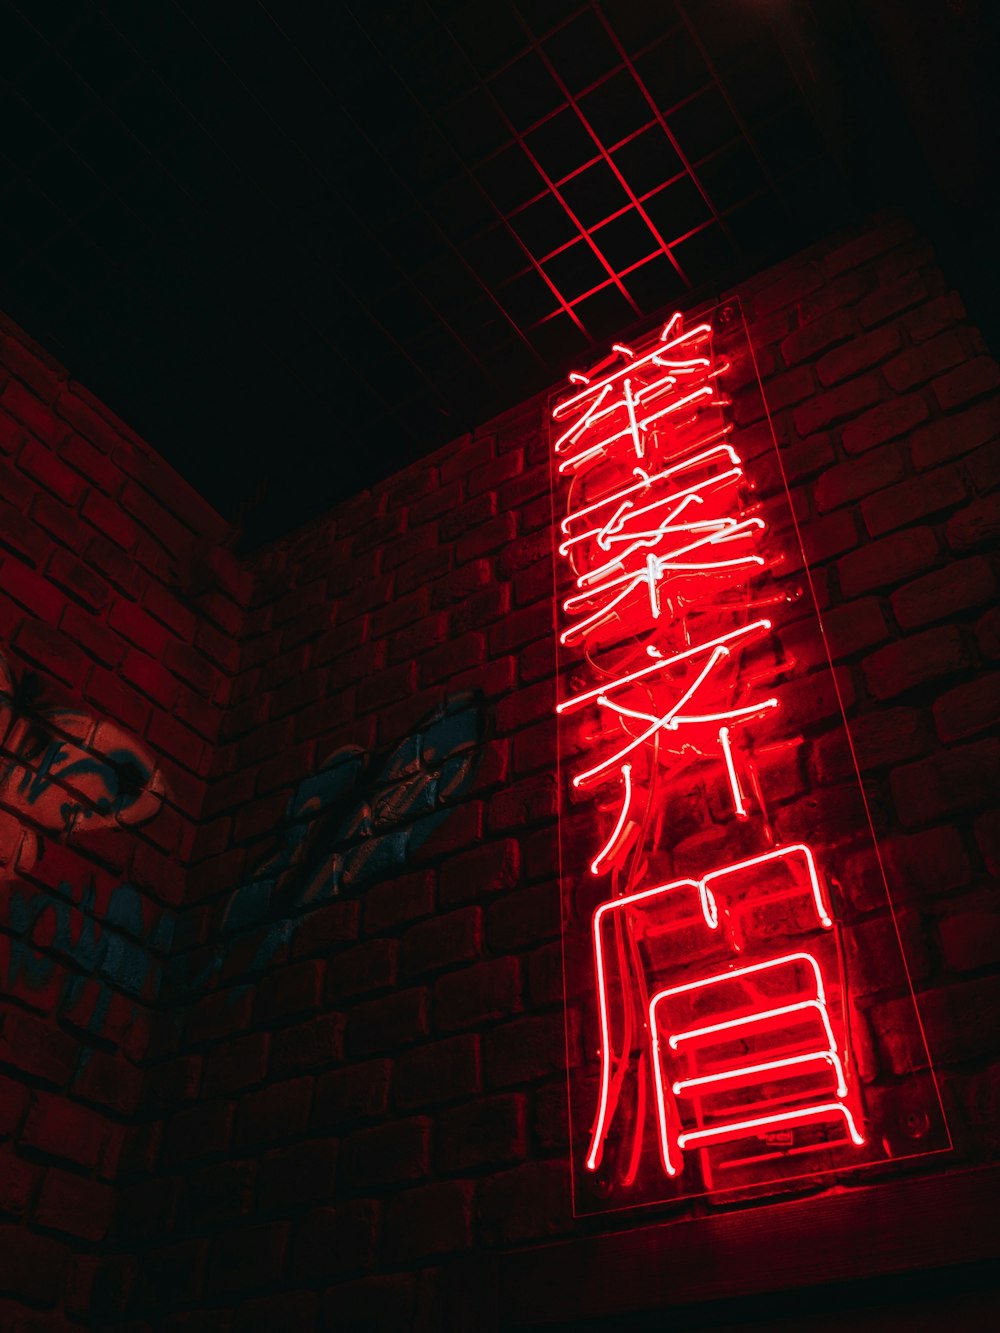 red and white kanji script neon signage